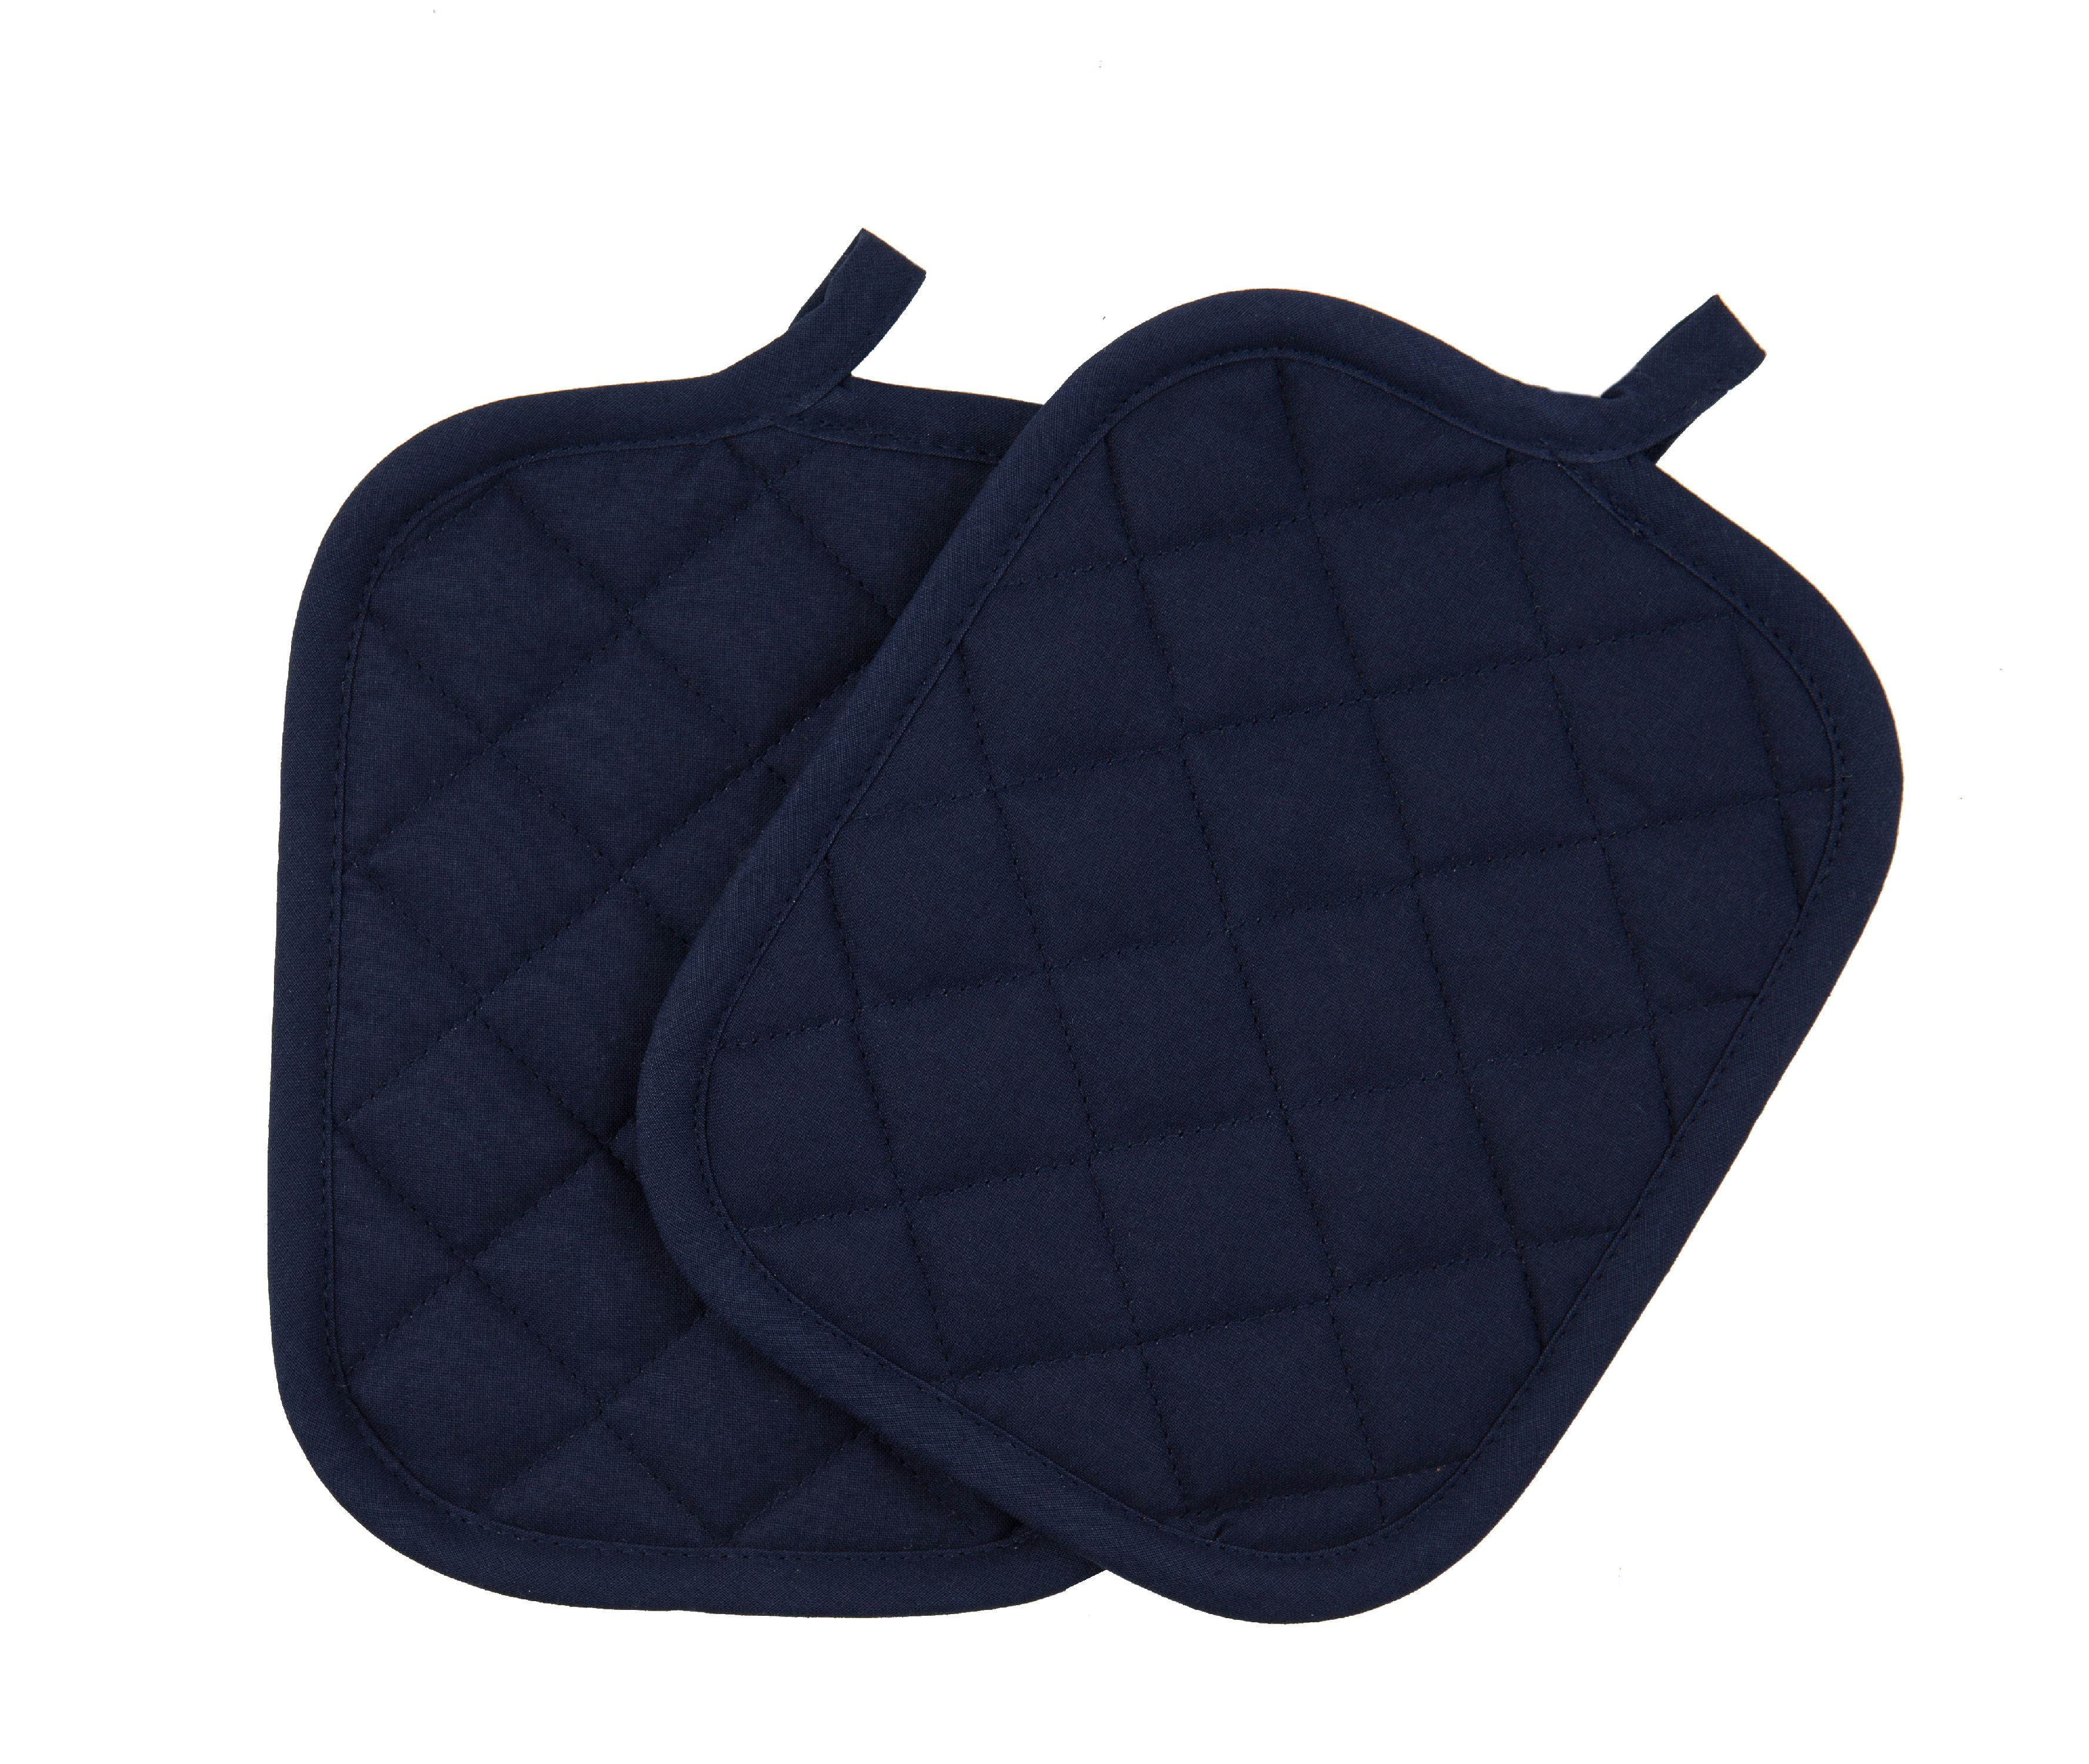 CUSHYSTORE Navy Blue Pot Holders Oven Pads Soft Fabric for Cooking Kitchen 7.75, 2 Pack